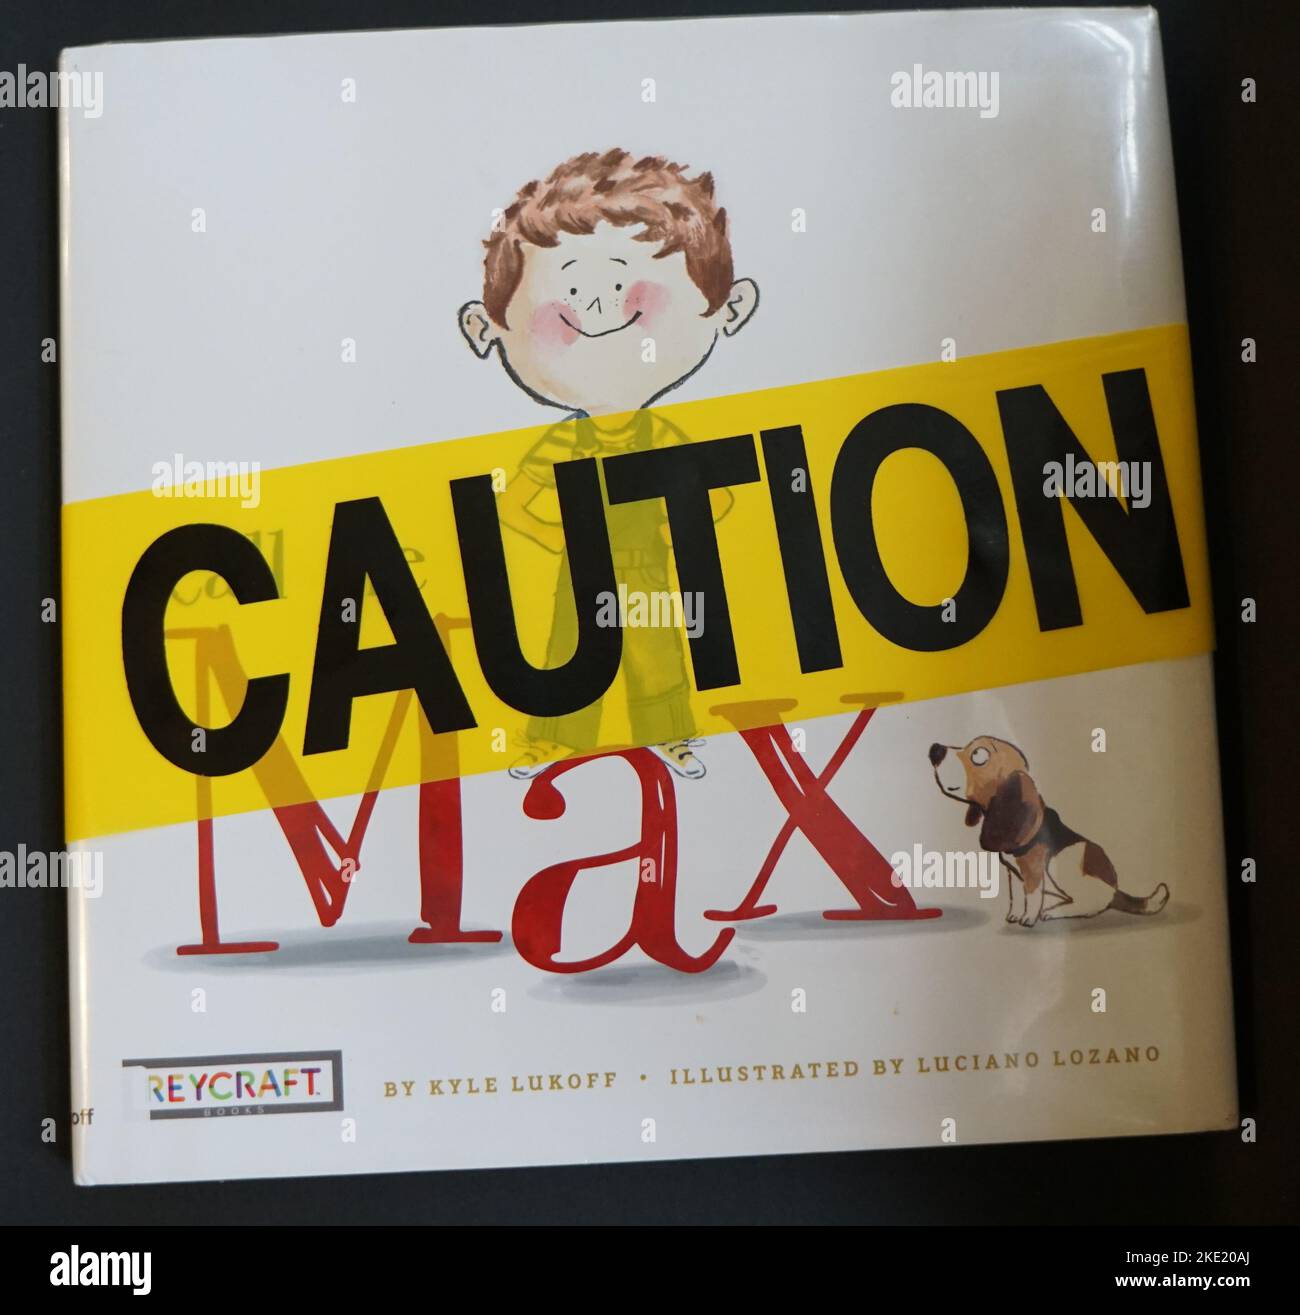 A copy of the children's book Call Me Max with caution tape. The book has been banned in some schools and libraries due to gender identity content. Stock Photo